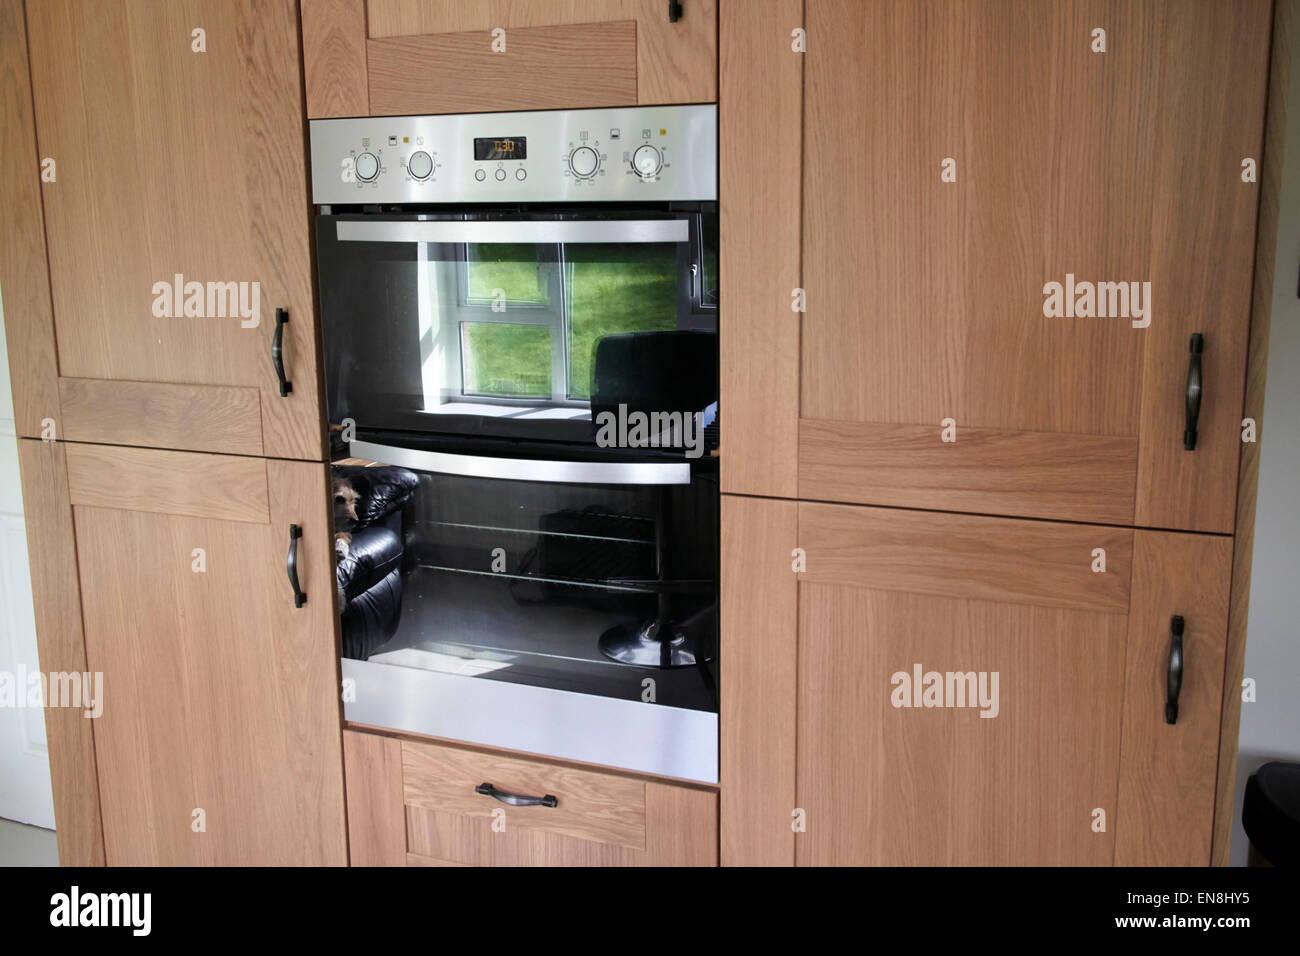 double oven built in to a brand new household kitchen in the uk Stock Photo